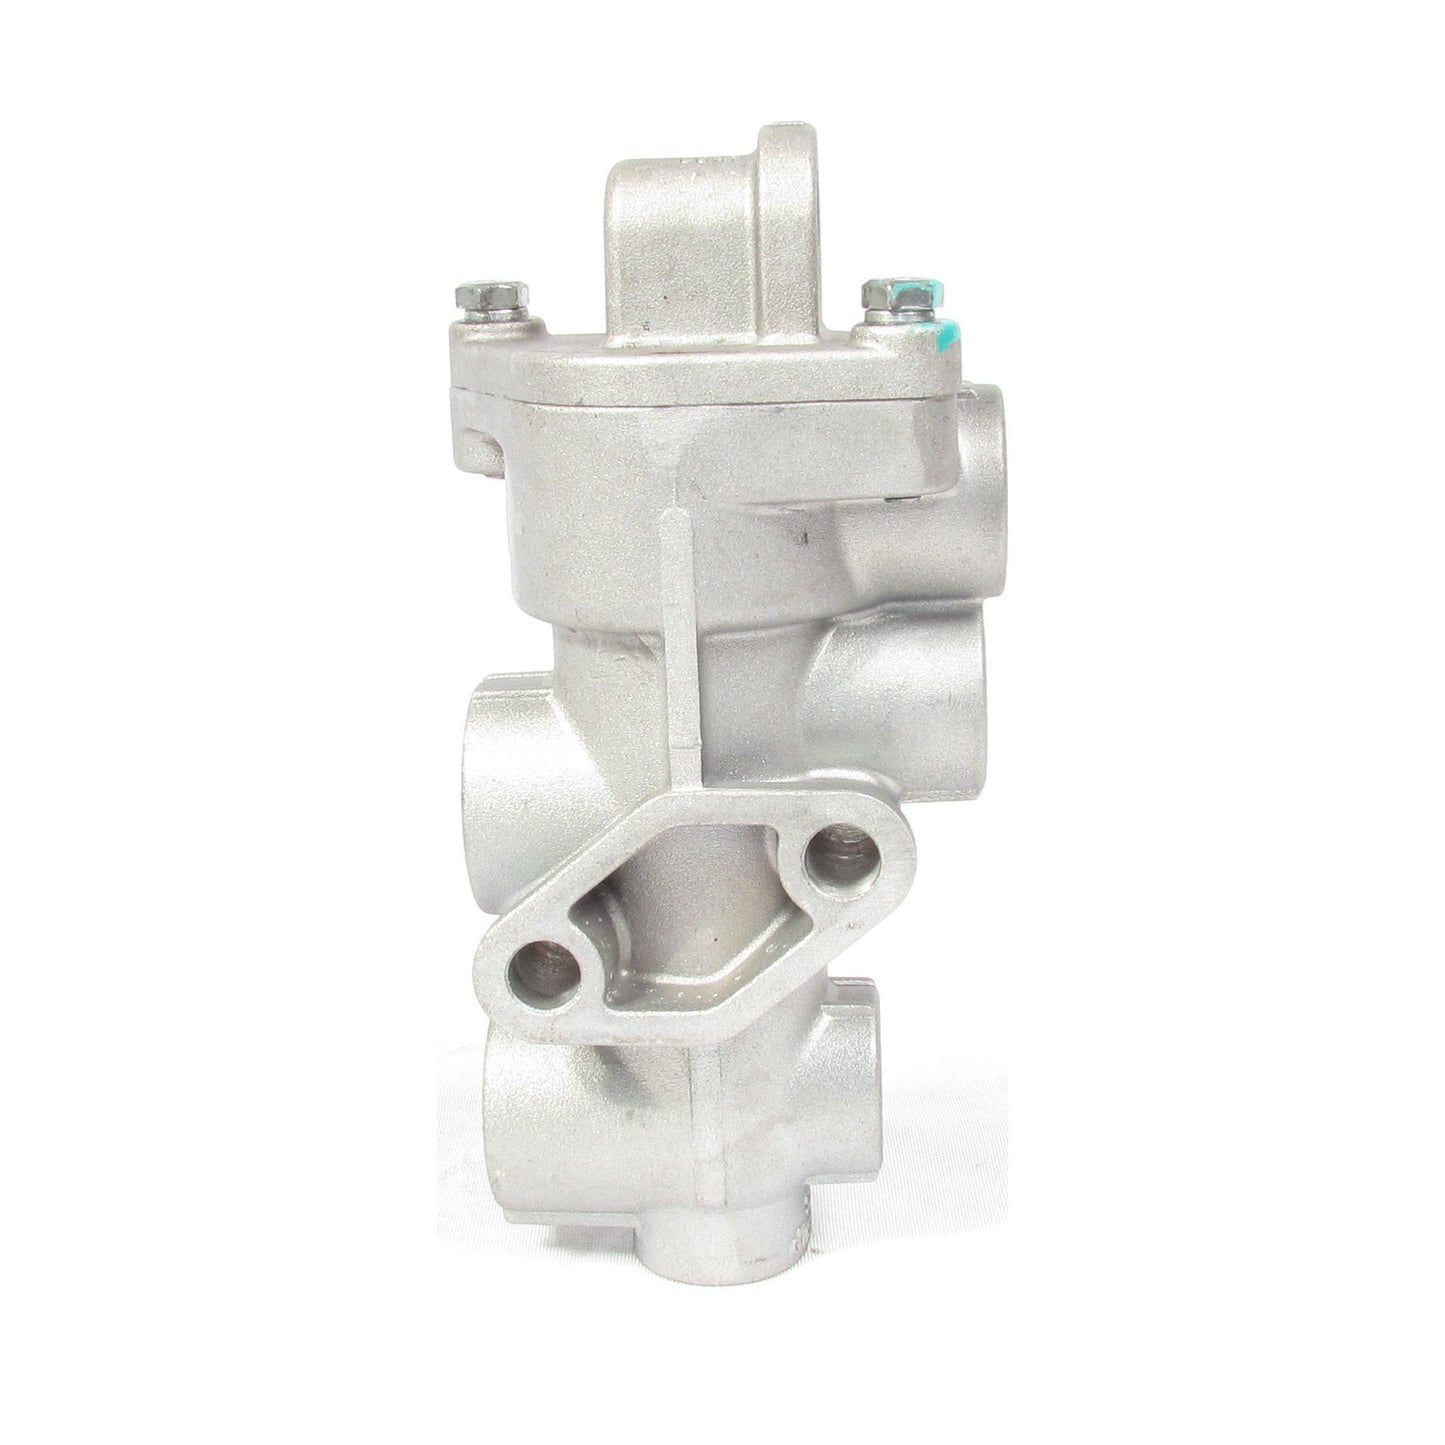 Fortpro TP-3DC Type Tractor Protection Valve Replacement for Bendix 065706 | F224685